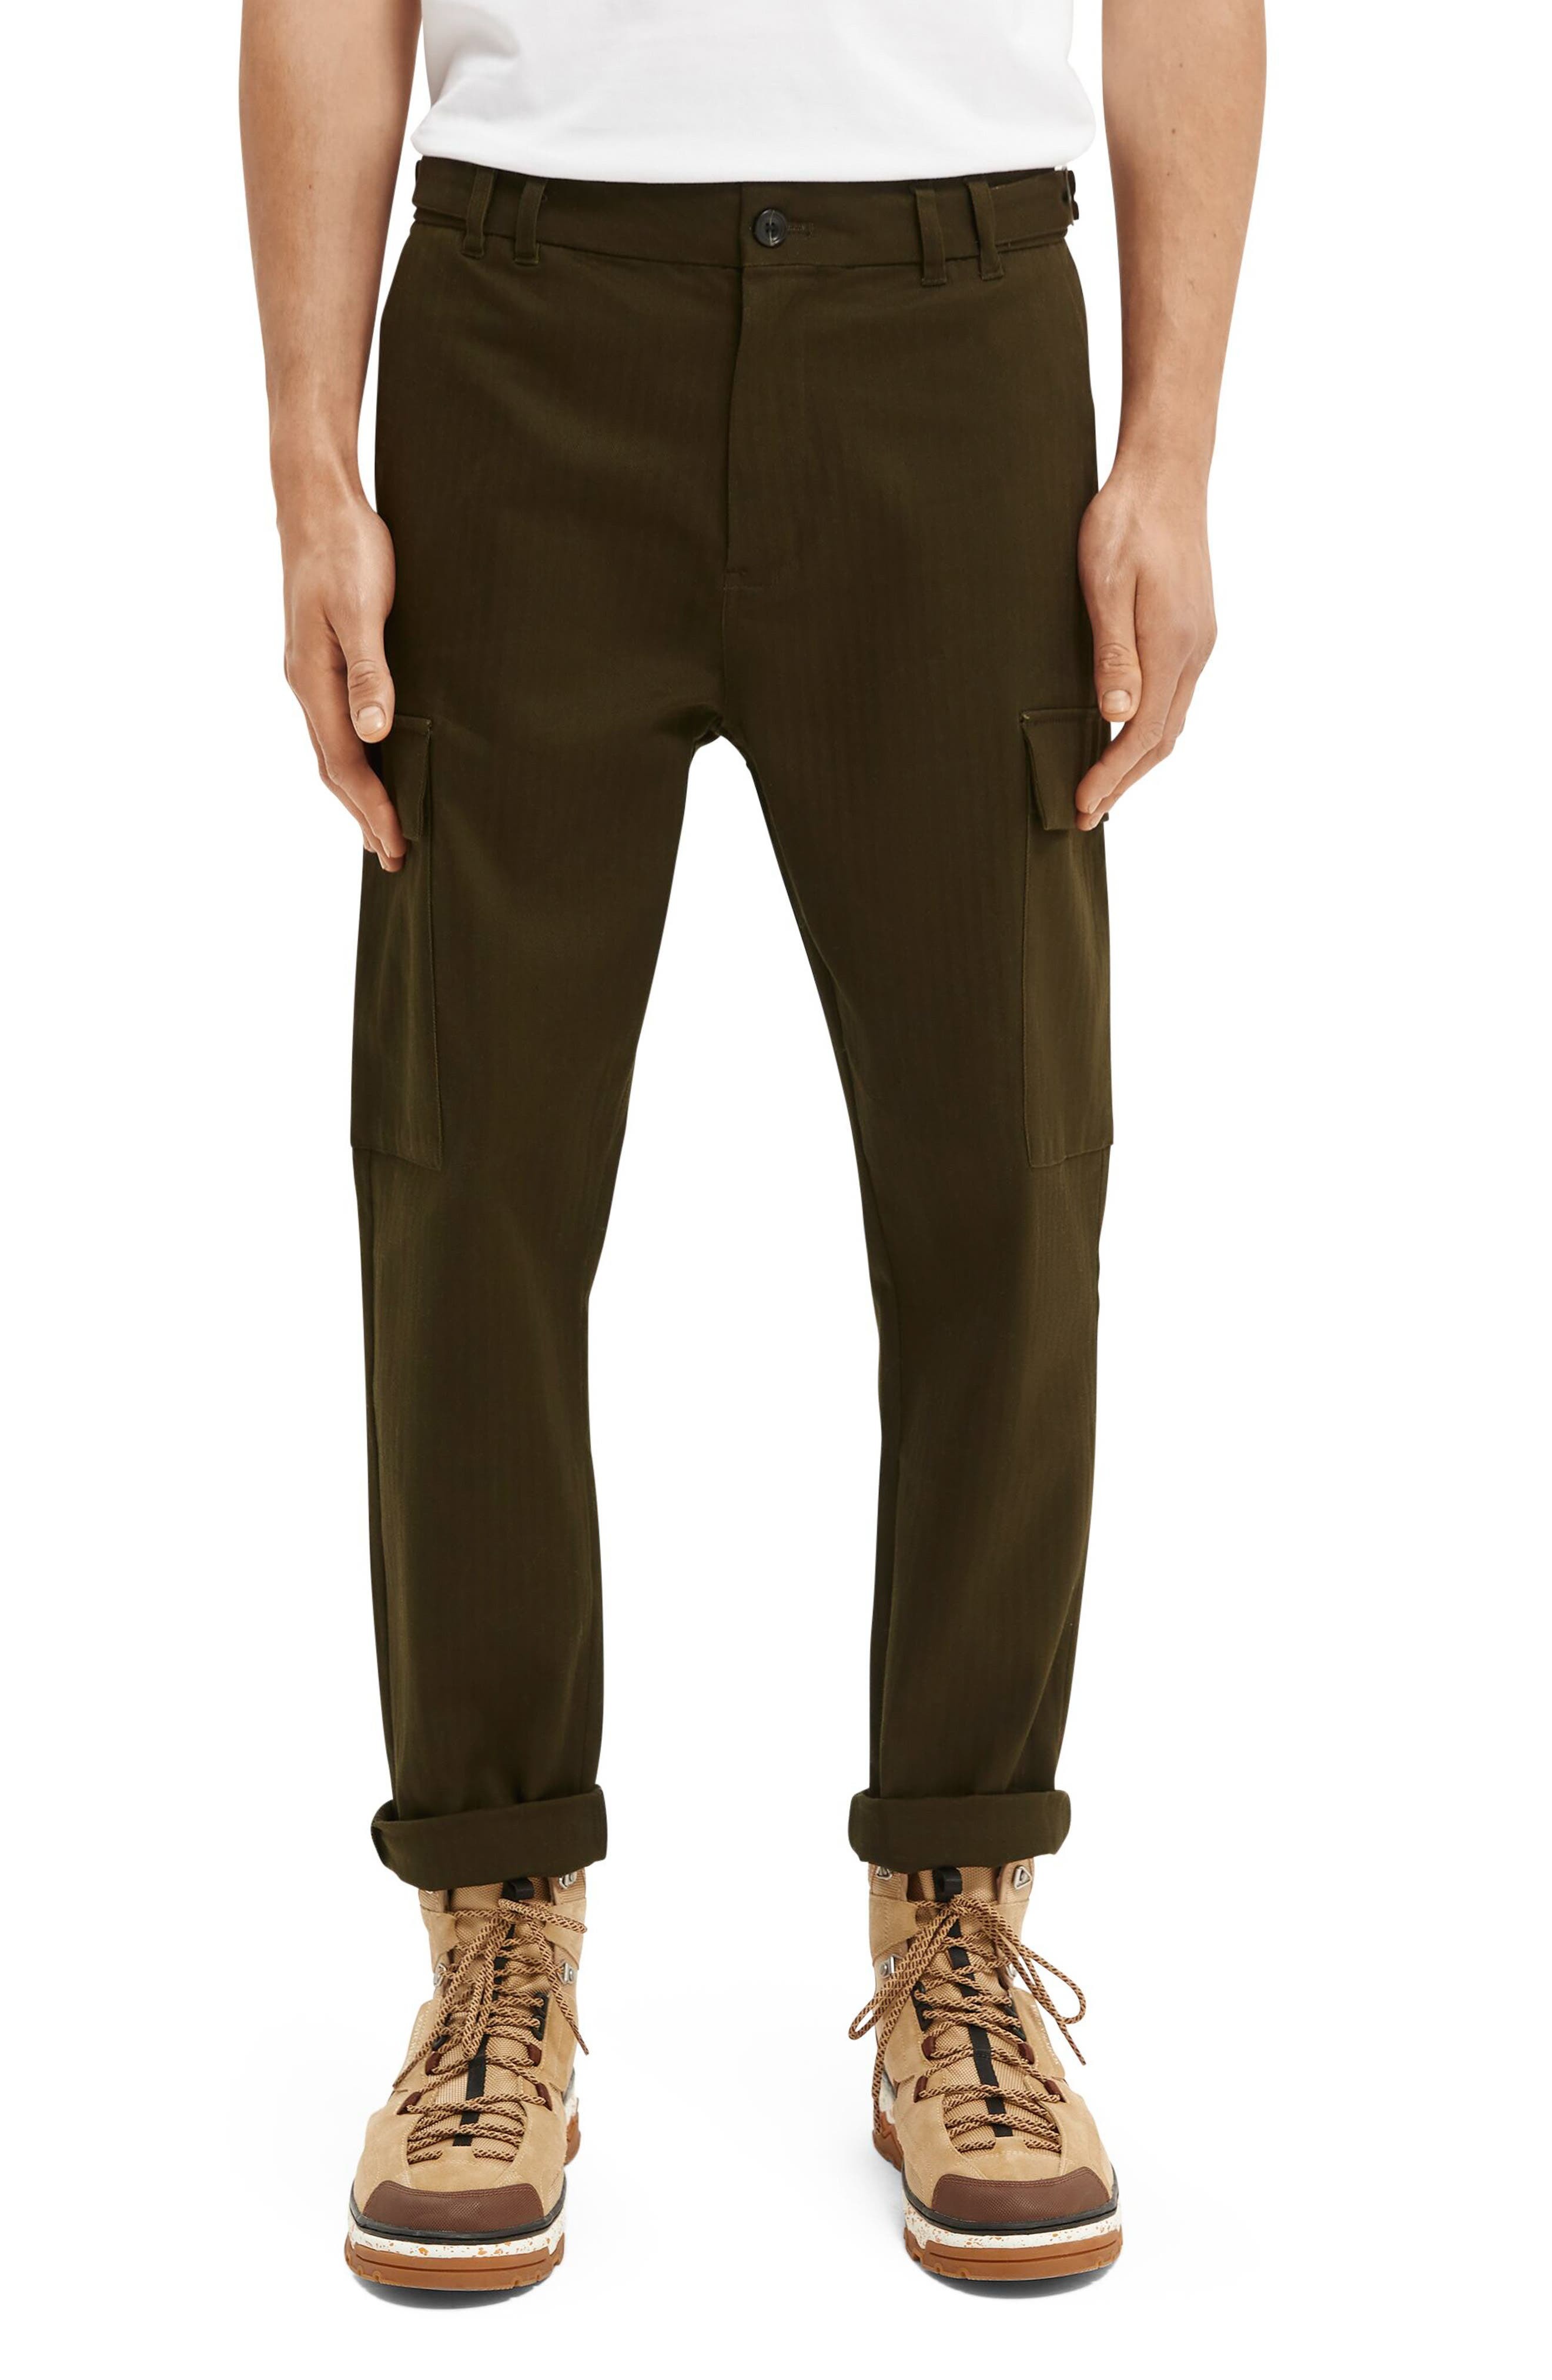 Scotch & Soda Fave Organic Cotton Cargo Pants, $178 | Nordstrom | Lookastic